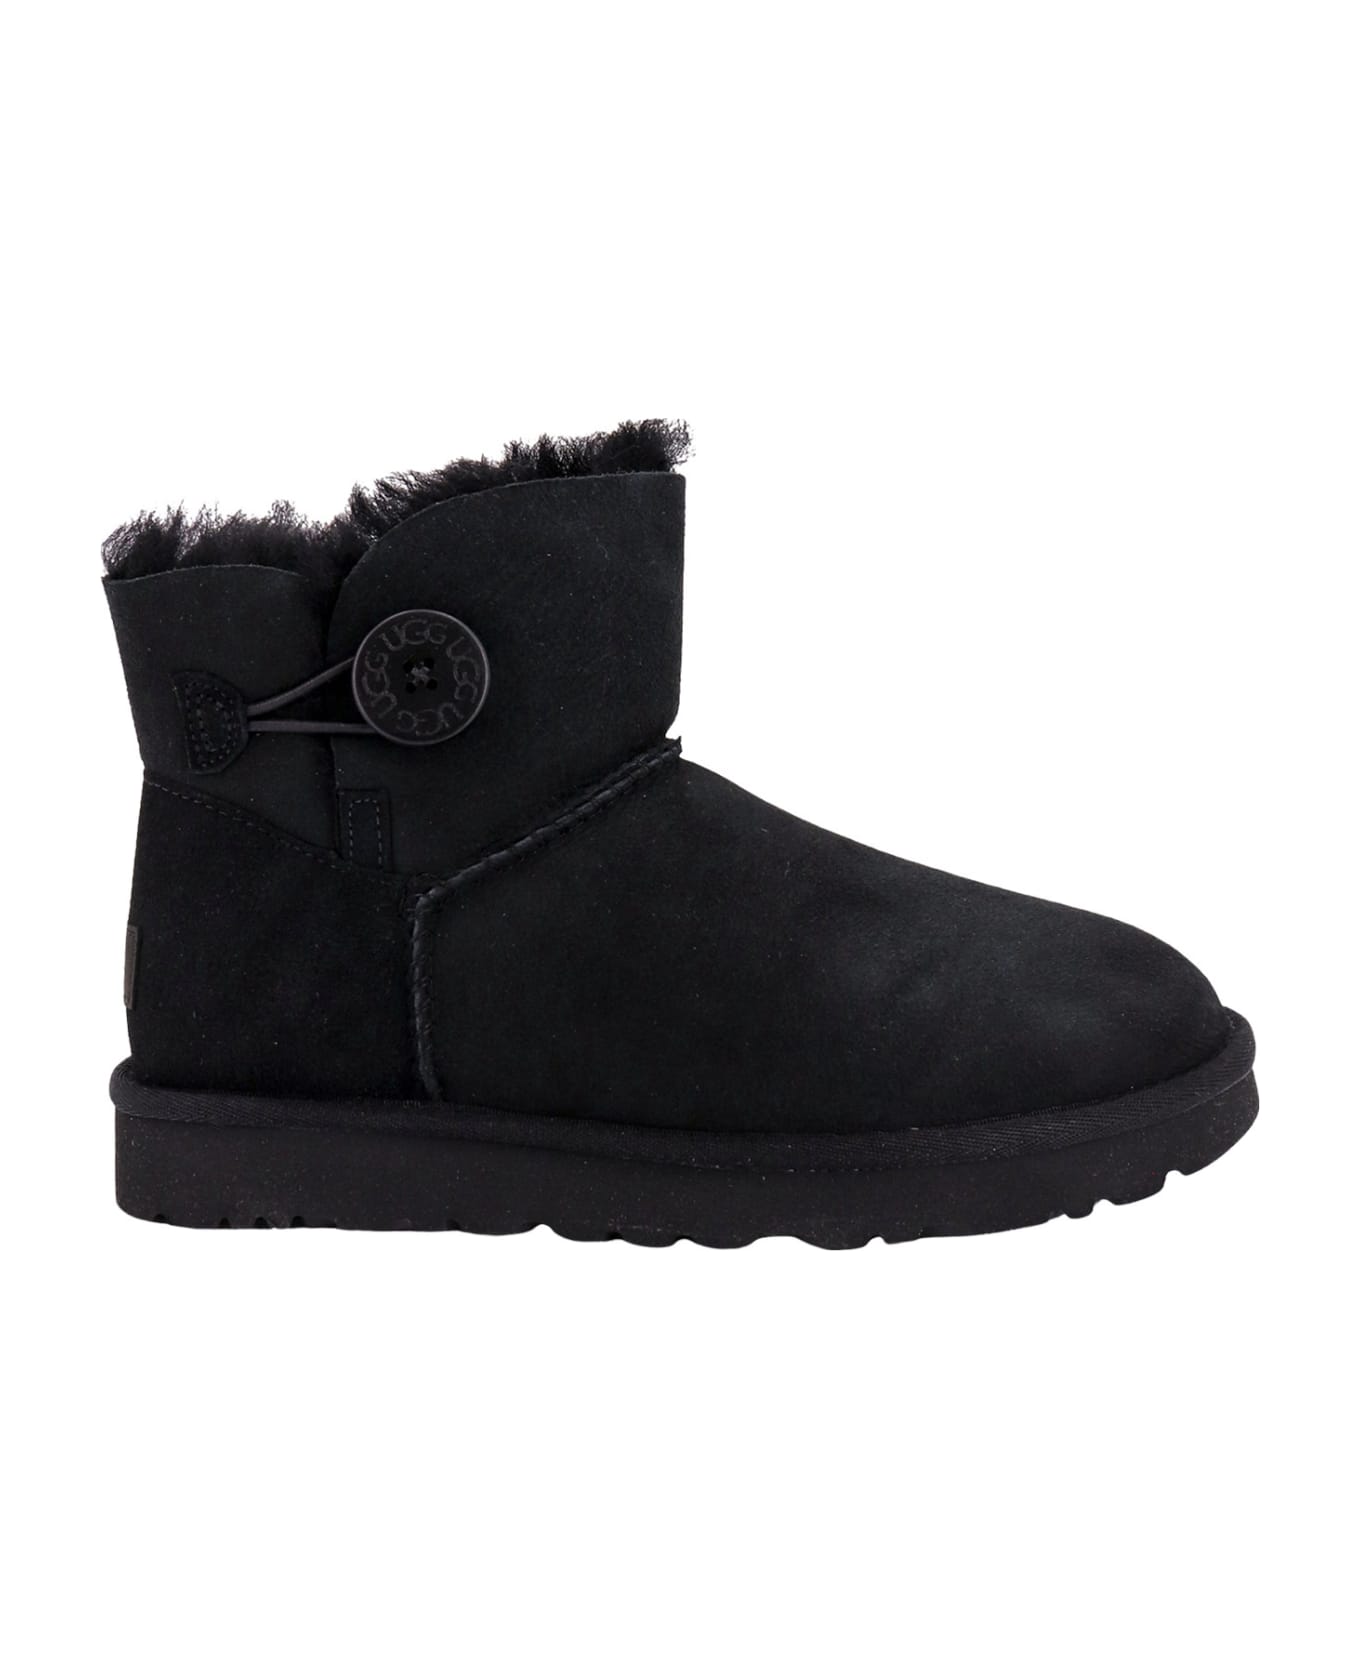 UGG Mini Baley Button Ankle Boots - Black ブーツ